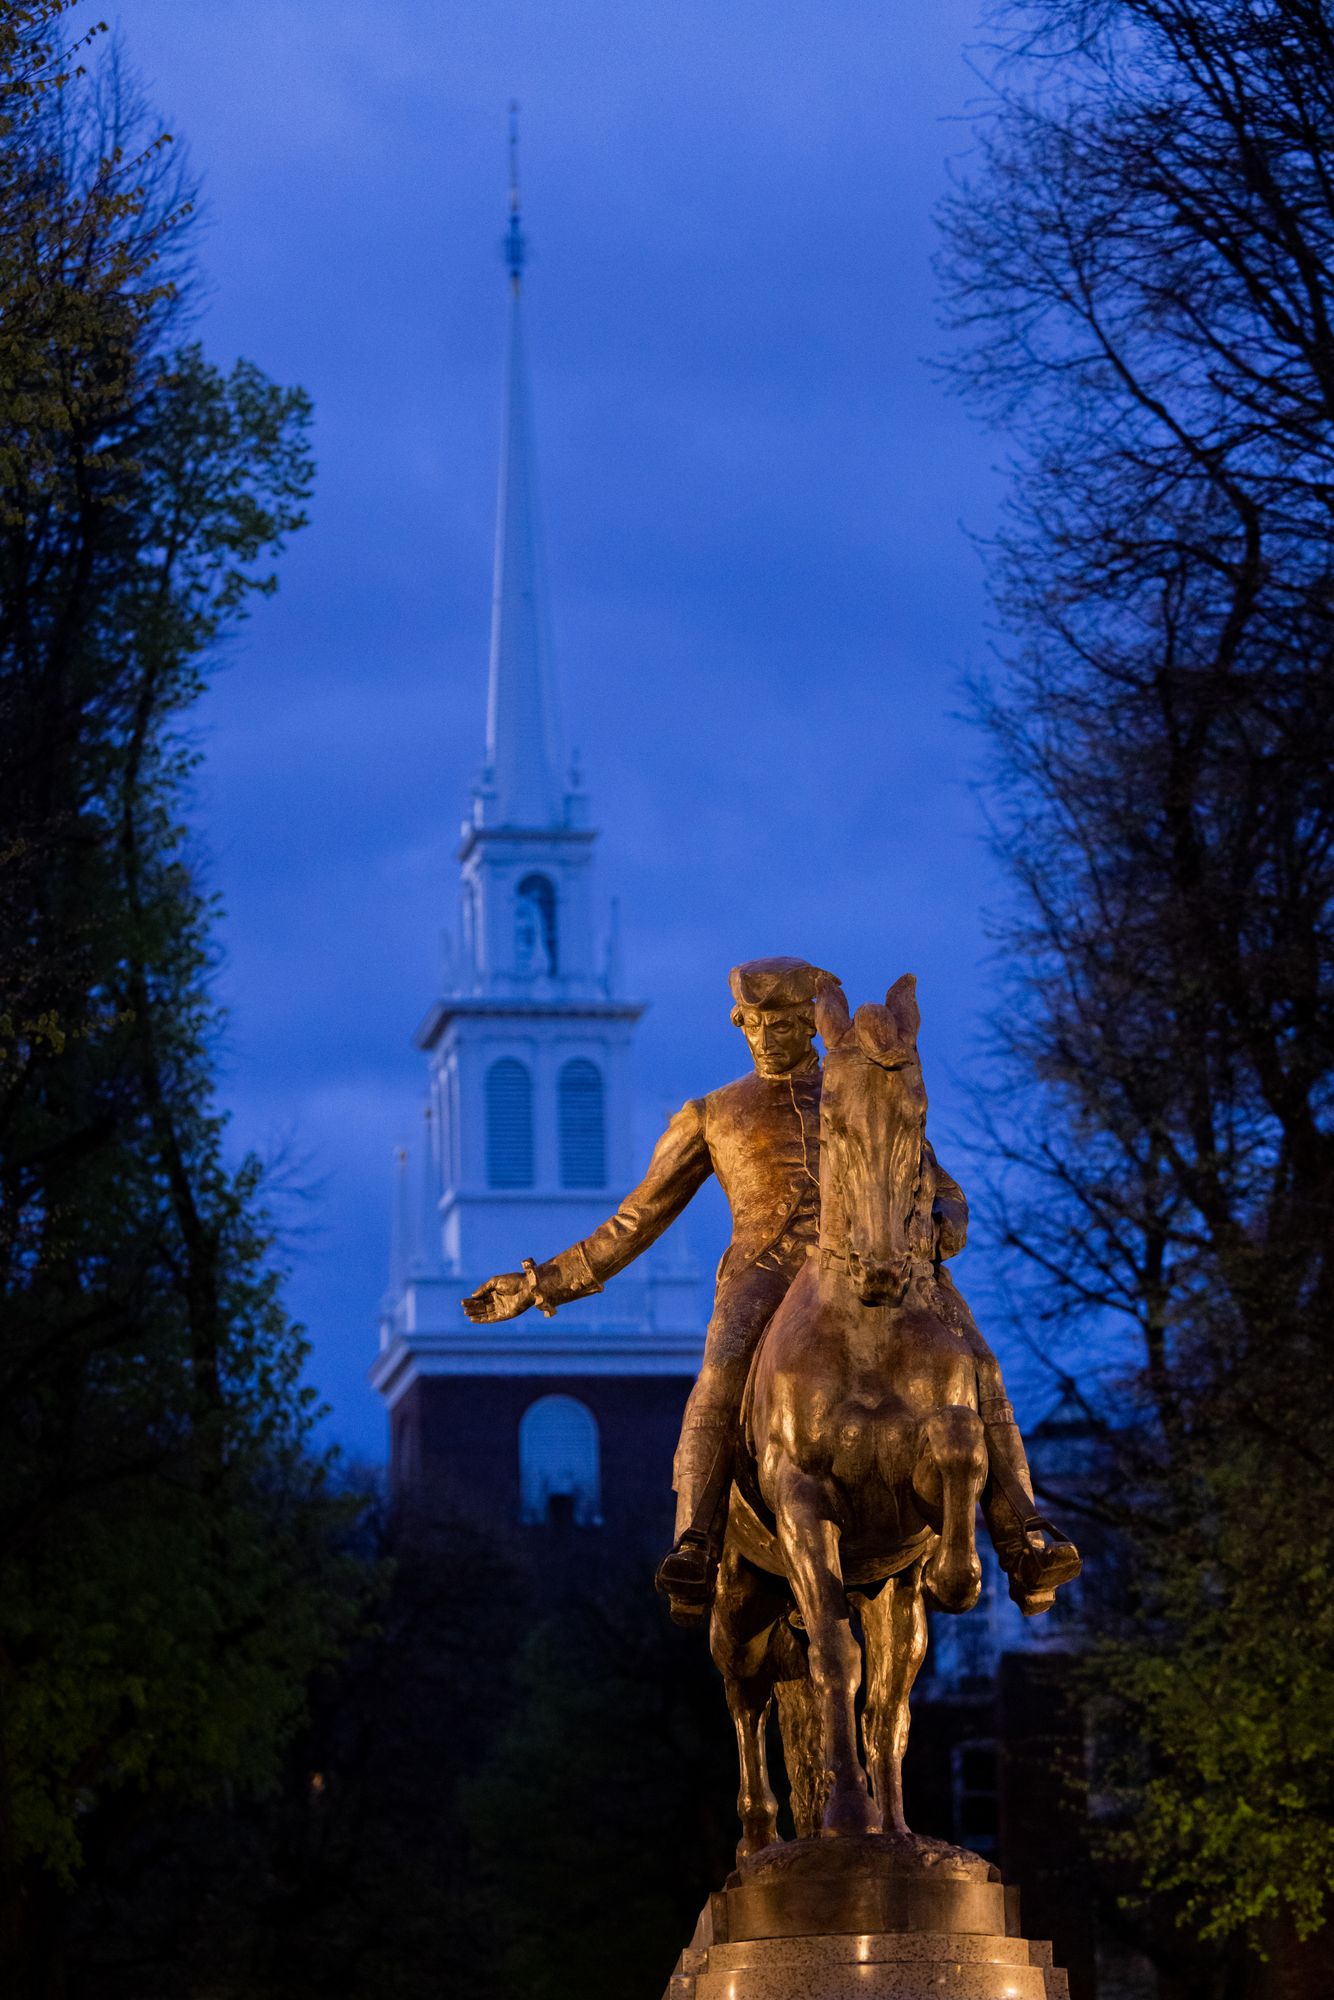 A statue of Paul Revere riding a horse in front of Old North Church in Boston at magic hour.